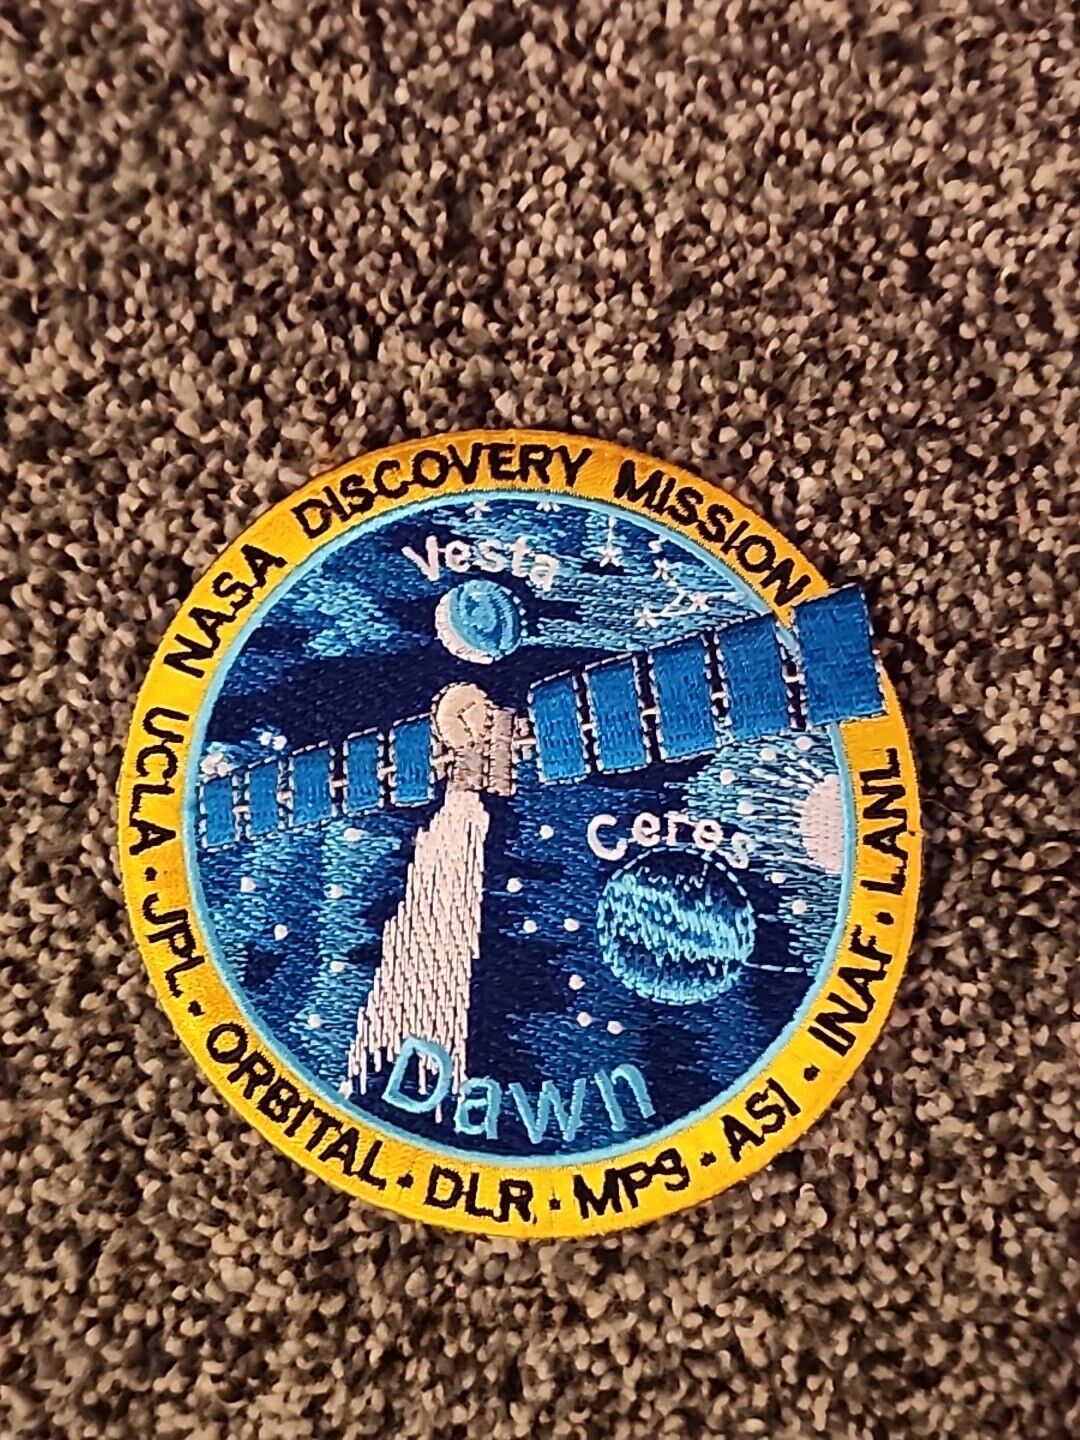 NASA DISCOVERY MISSION - VESTA - CERES - DAWN -JPL -ORBITAL - UCLA - SPACE PATCH